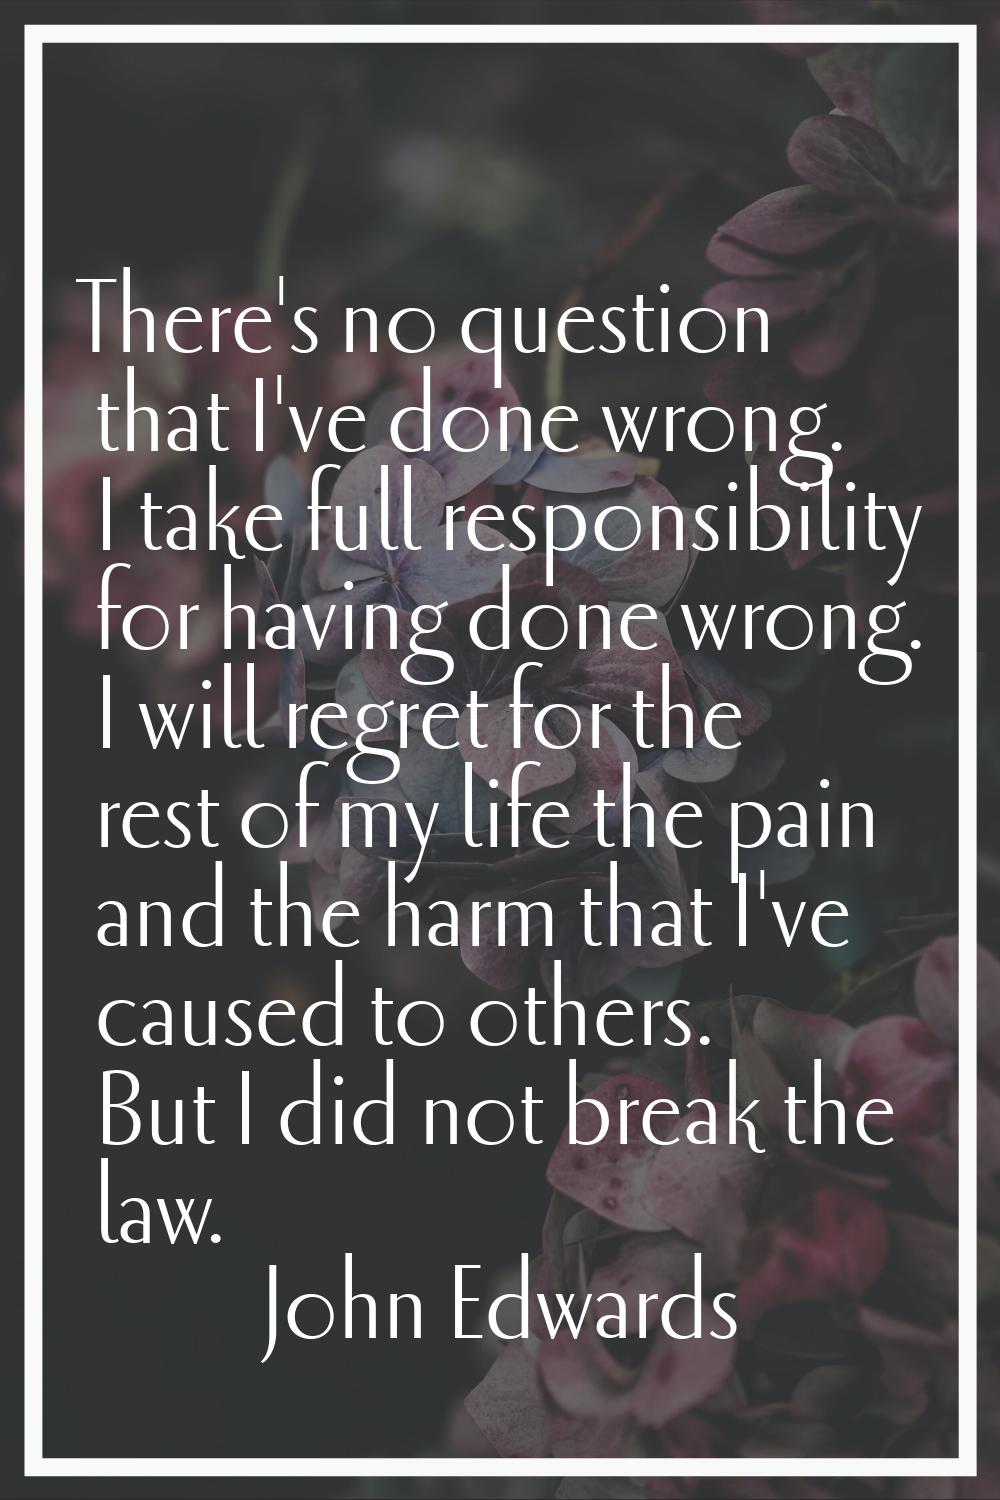 There's no question that I've done wrong. I take full responsibility for having done wrong. I will 